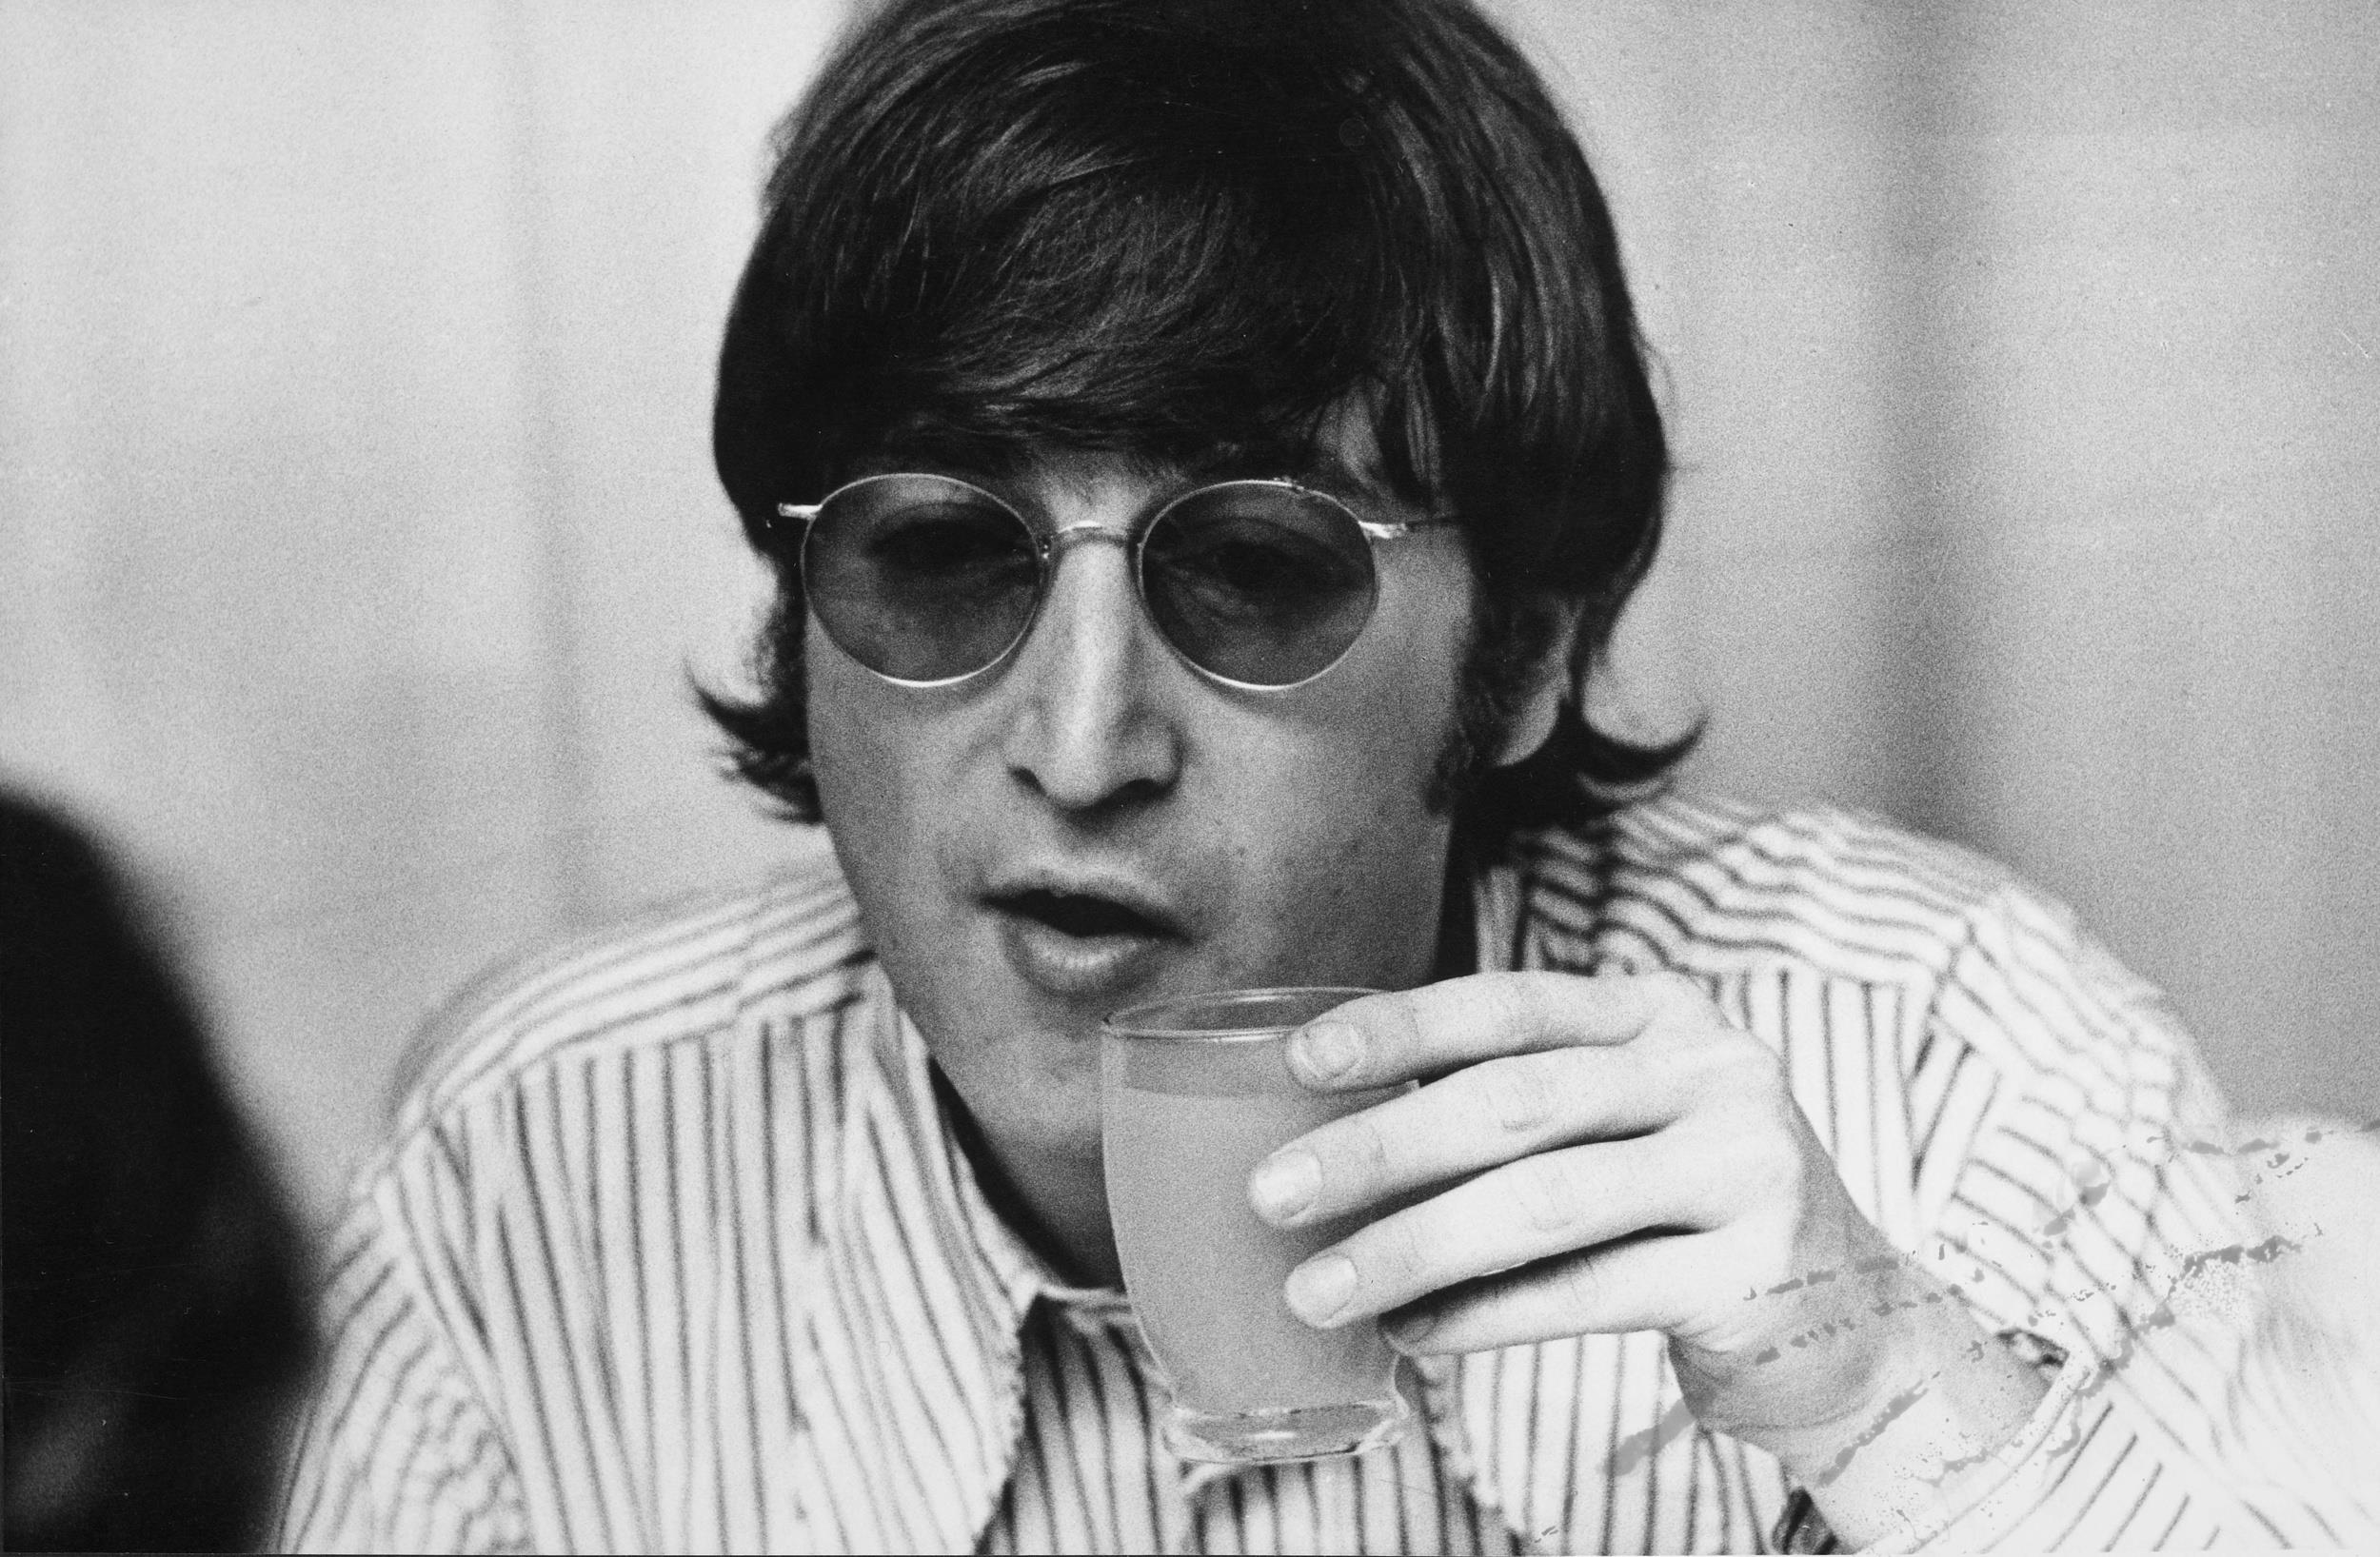 <p>“Turn off your mind, relax and float downstream.” Lennon found the inspiration for this groundbreaking “Revolver” track from a read of “The Psychedelic Experience: A Manual Based on the Tibetan Book of the Dead”. The Indian influence is obvious (Harrison’s sitar is the key piece of instrumentation), and the reverse percussion is also striking. (Beck owes most of his career to this and “Taxman,") Was this cultural appropriation? Yes. Did it also open up millions of Americans and Brits to world music? Absolutely. The latter is far more important.</p><p><a href='https://www.msn.com/en-us/community/channel/vid-cj9pqbr0vn9in2b6ddcd8sfgpfq6x6utp44fssrv6mc2gtybw0us'>Follow us on MSN to see more of our exclusive entertainment content.</a></p>